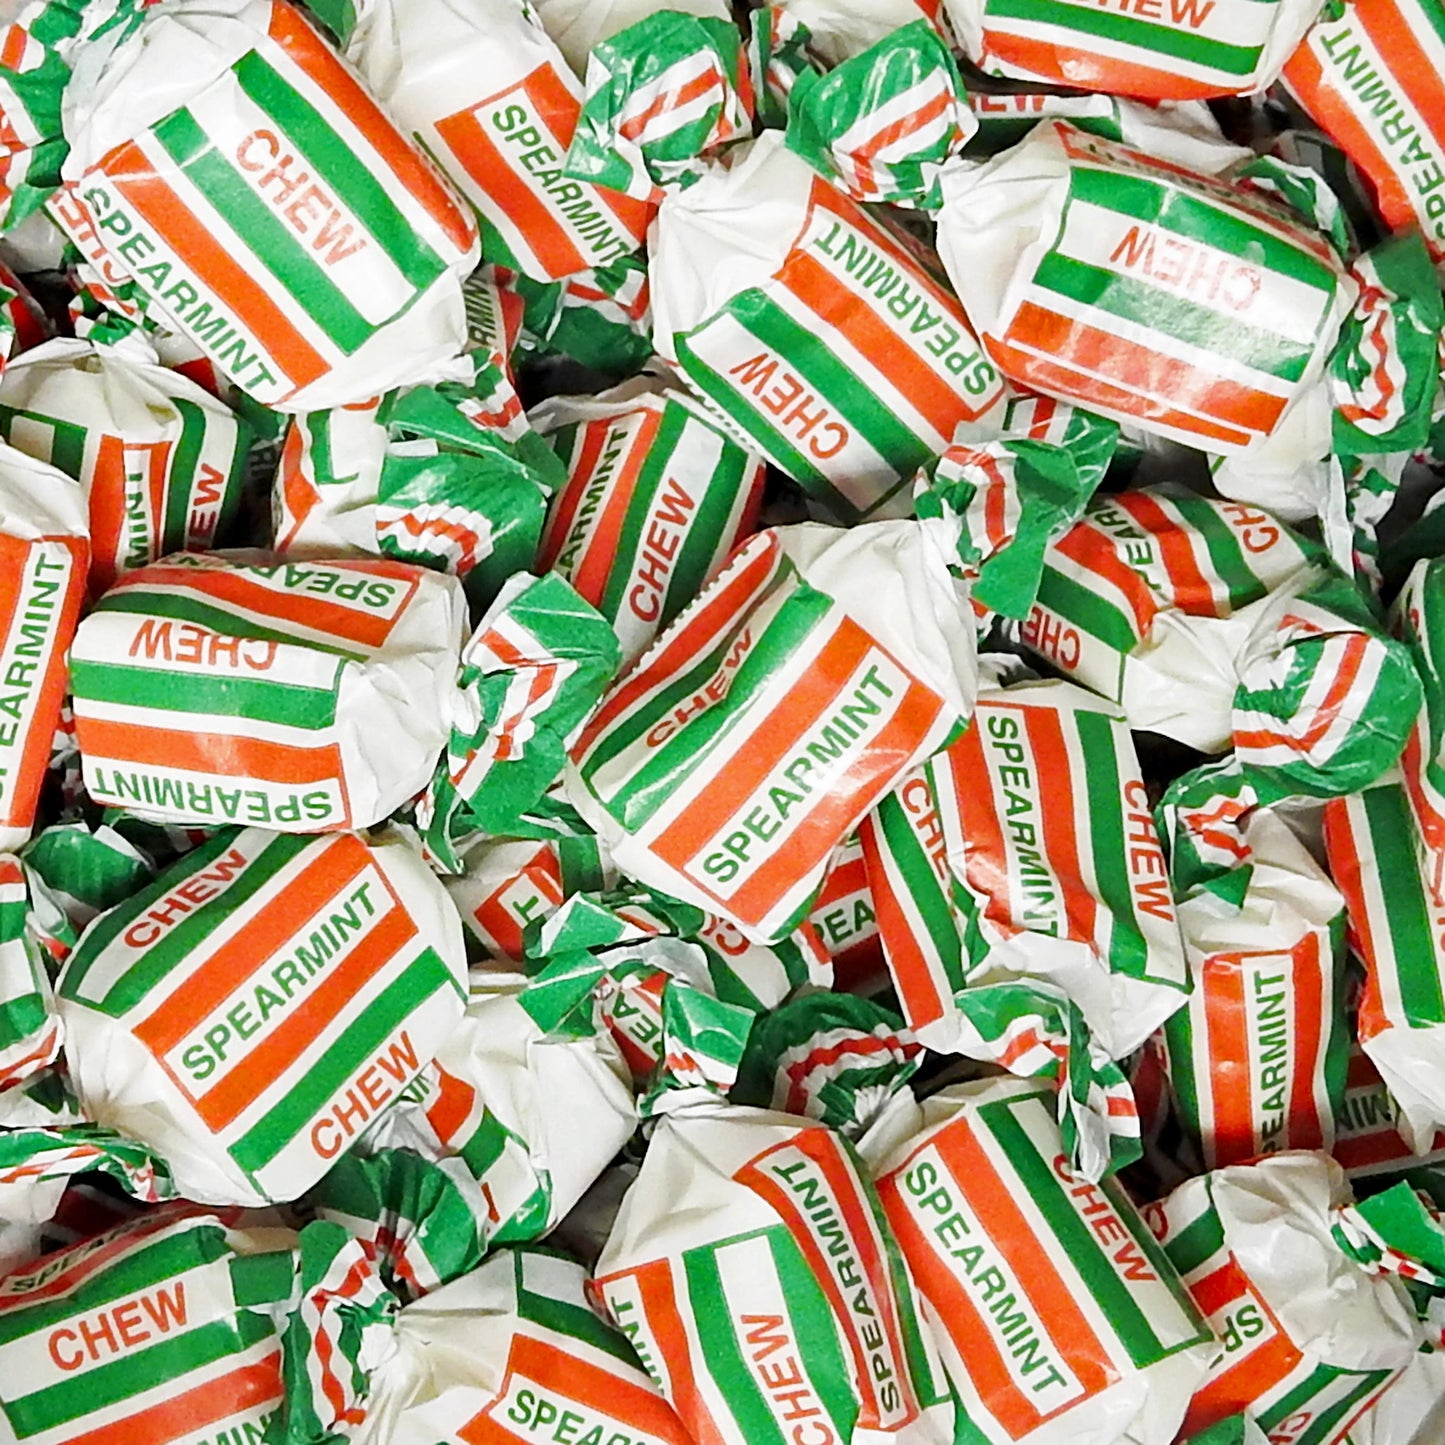 Spearmint Chews - Retro Sweets at The Sweetie Jar